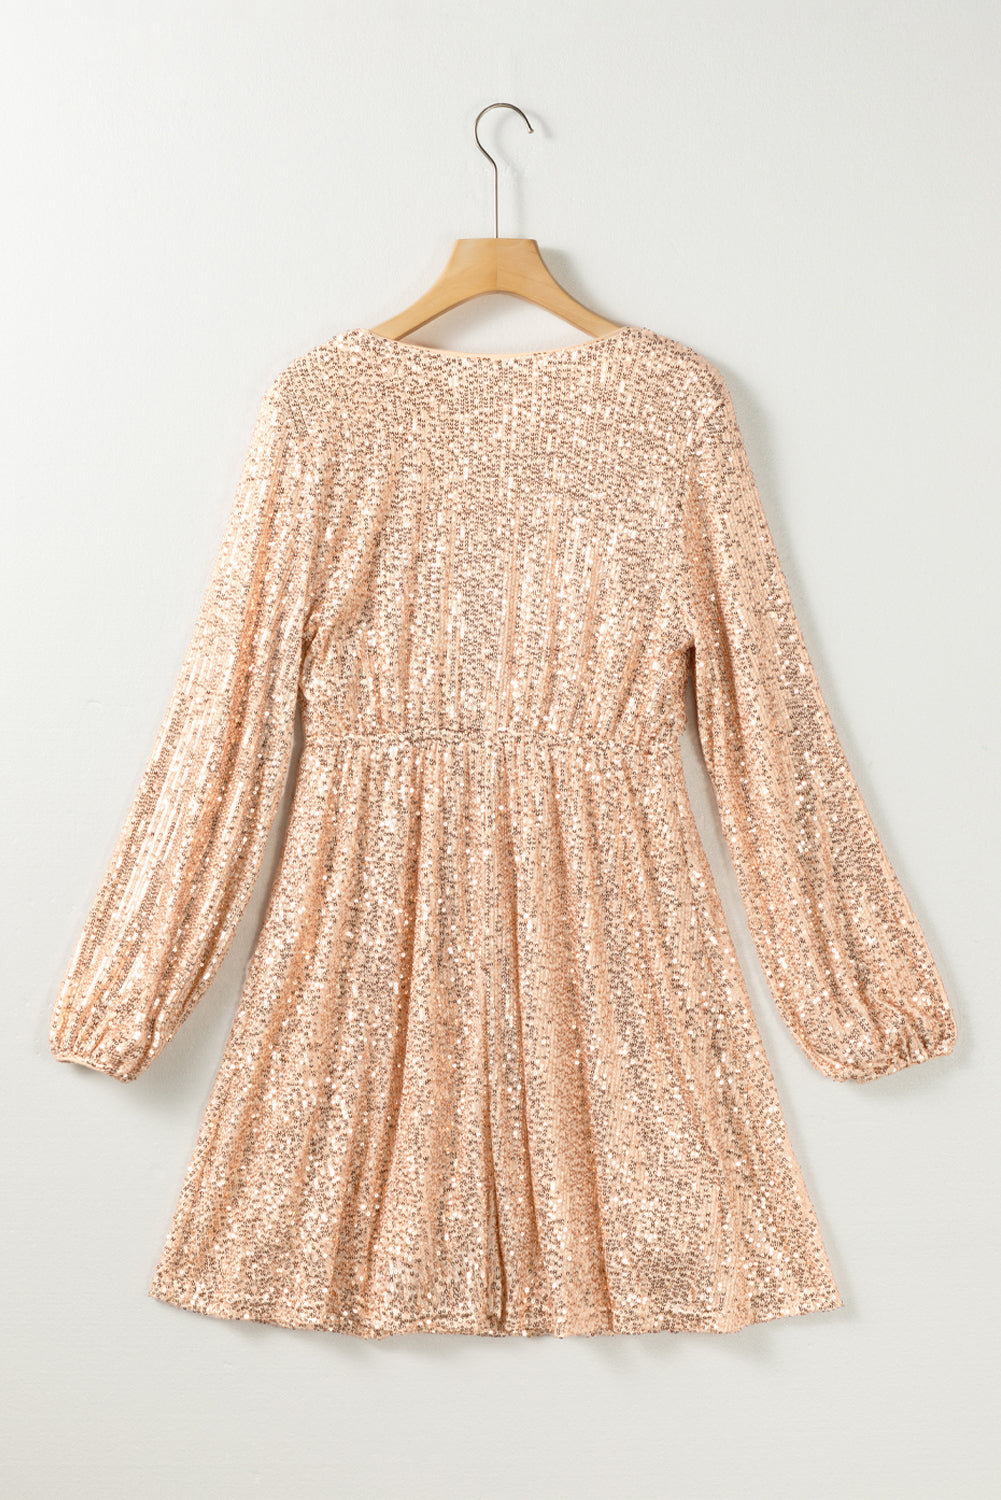 Apricot Wrapped V-neck Sequin Dress